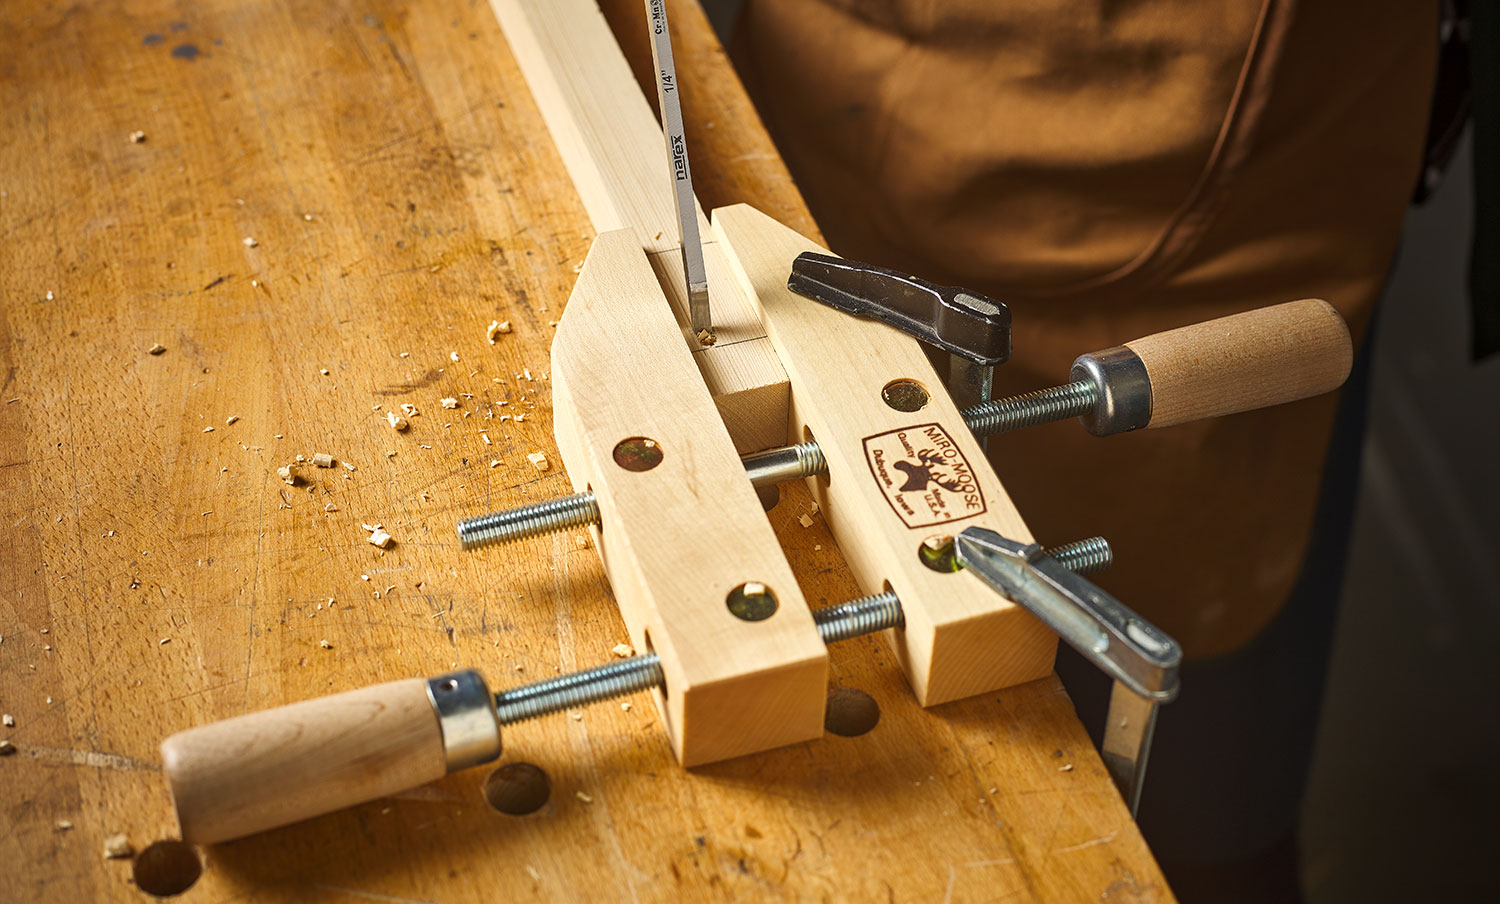 A board is held in a clamp while a Narex chisel is being used to cut a mortise.